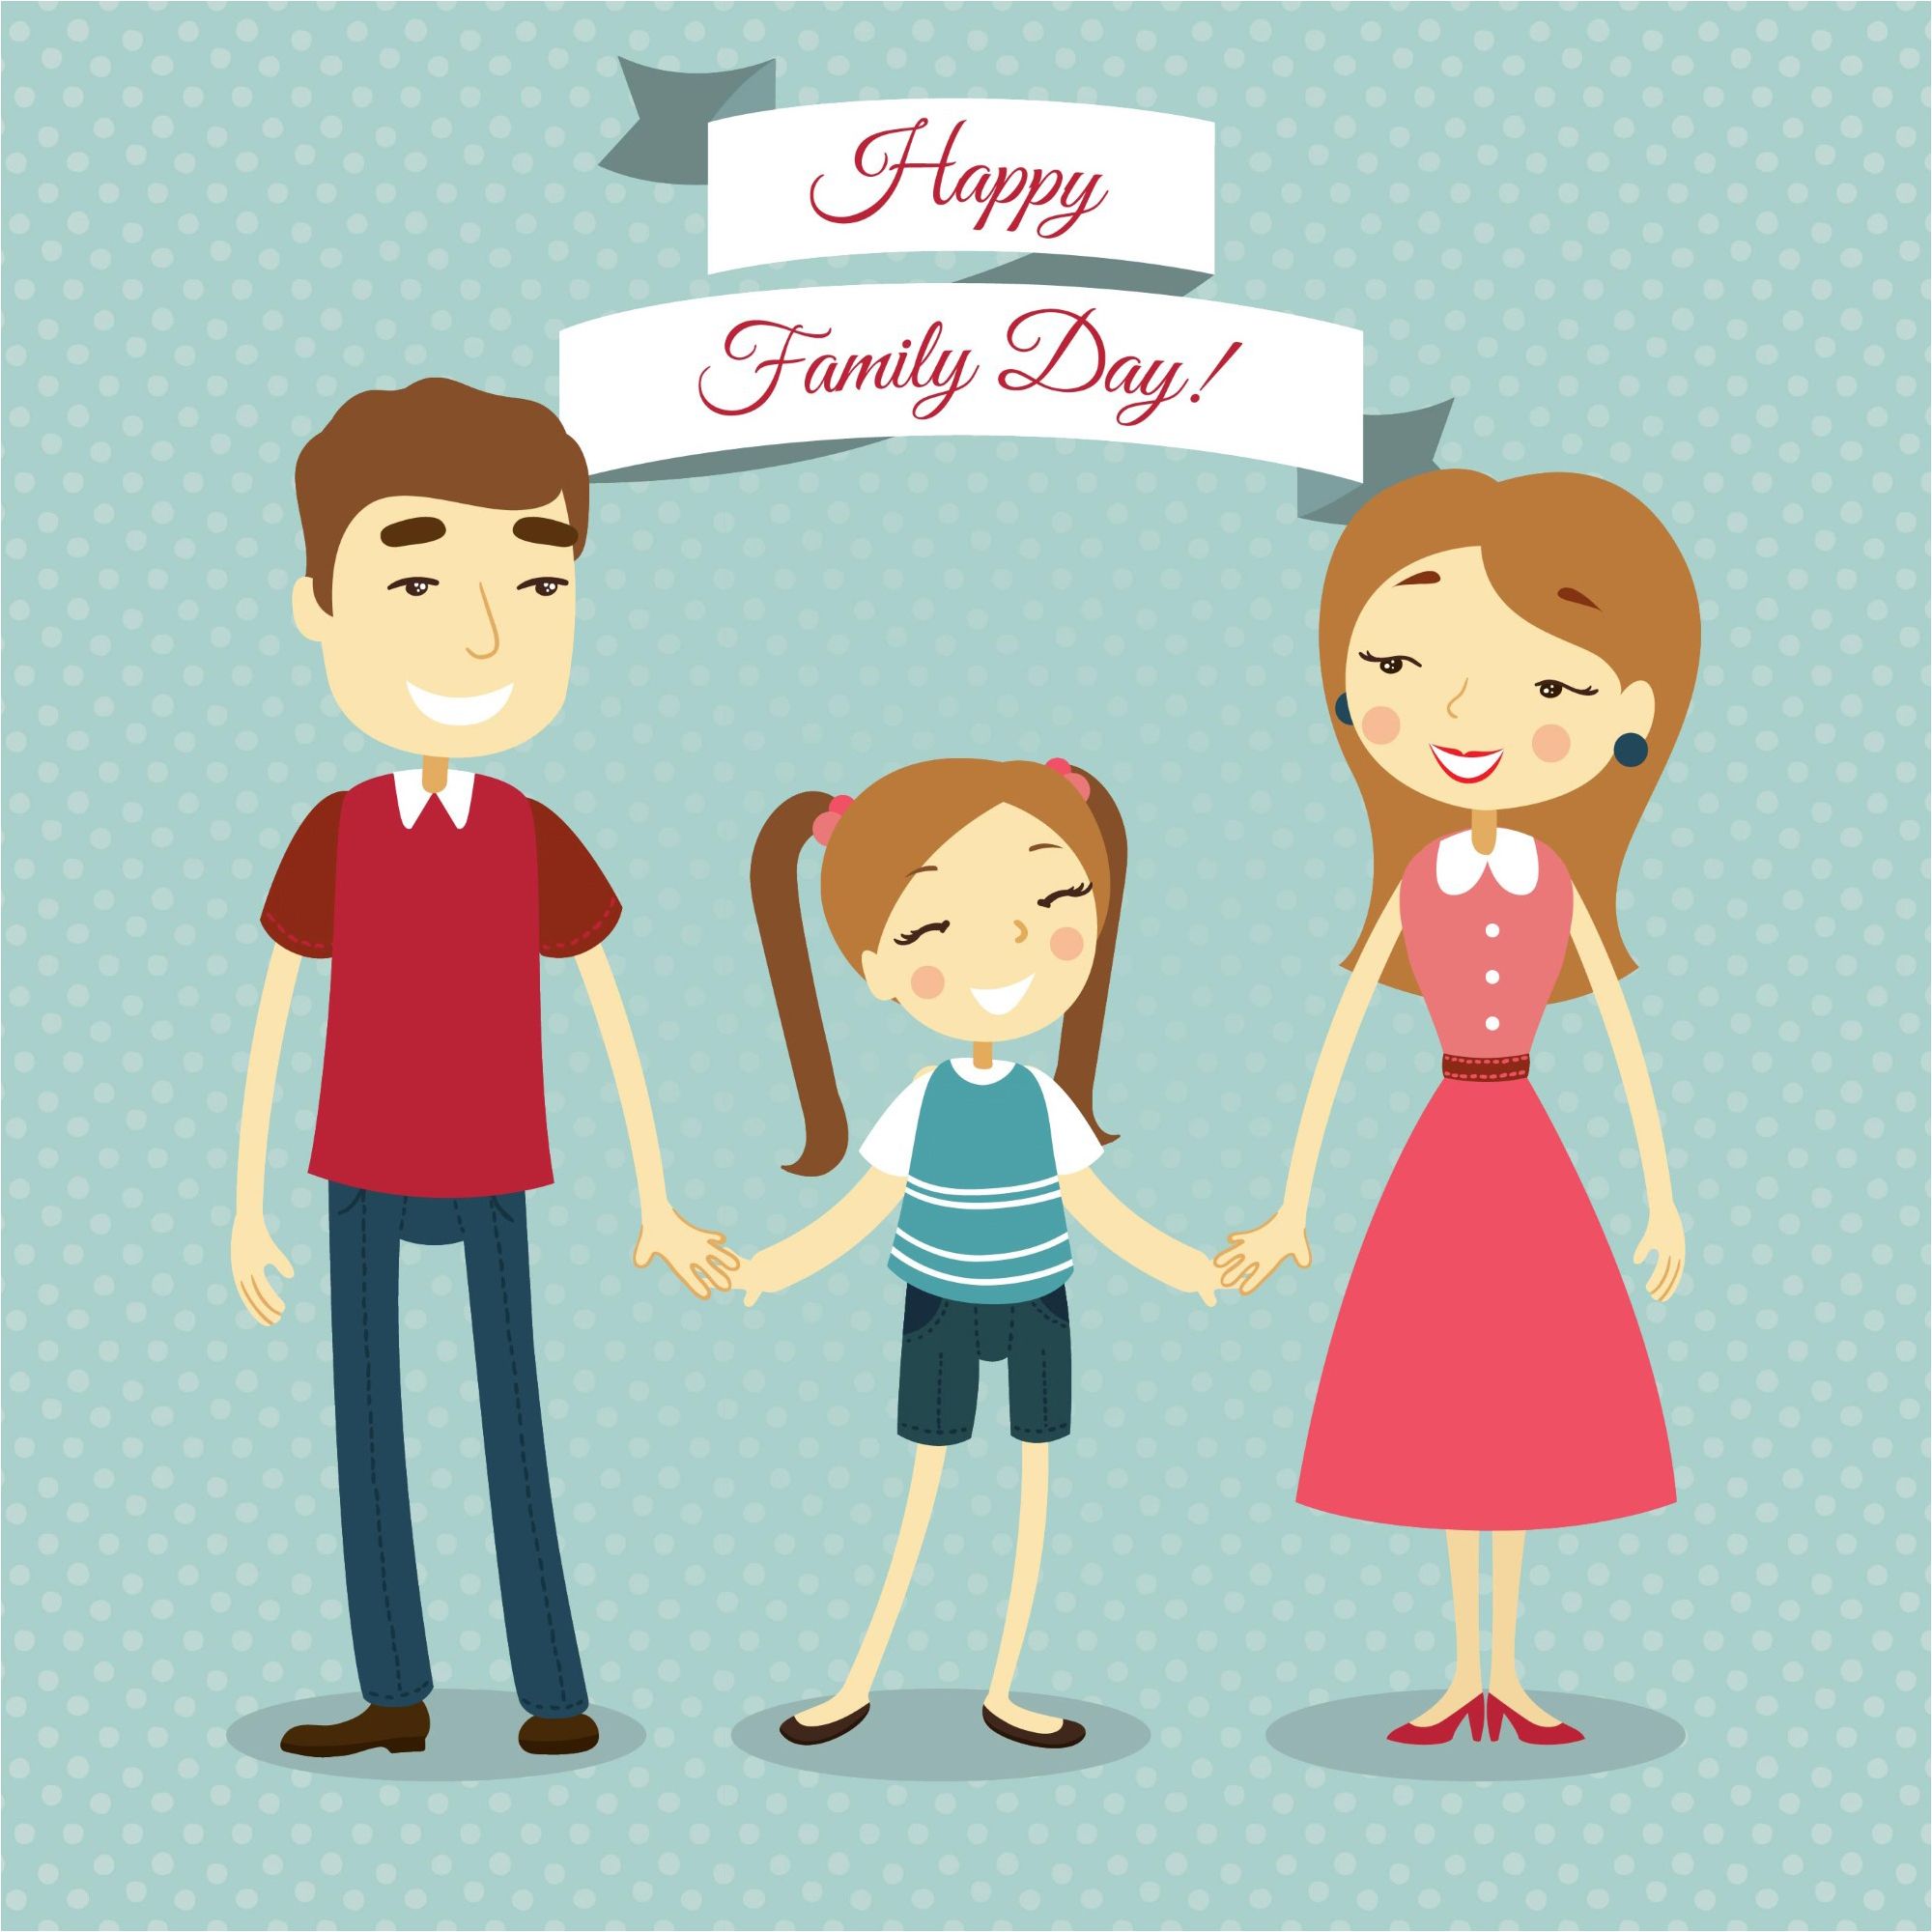 Happy Lovely Family Day Background Wallpaper & Vectors | 500 Best ...